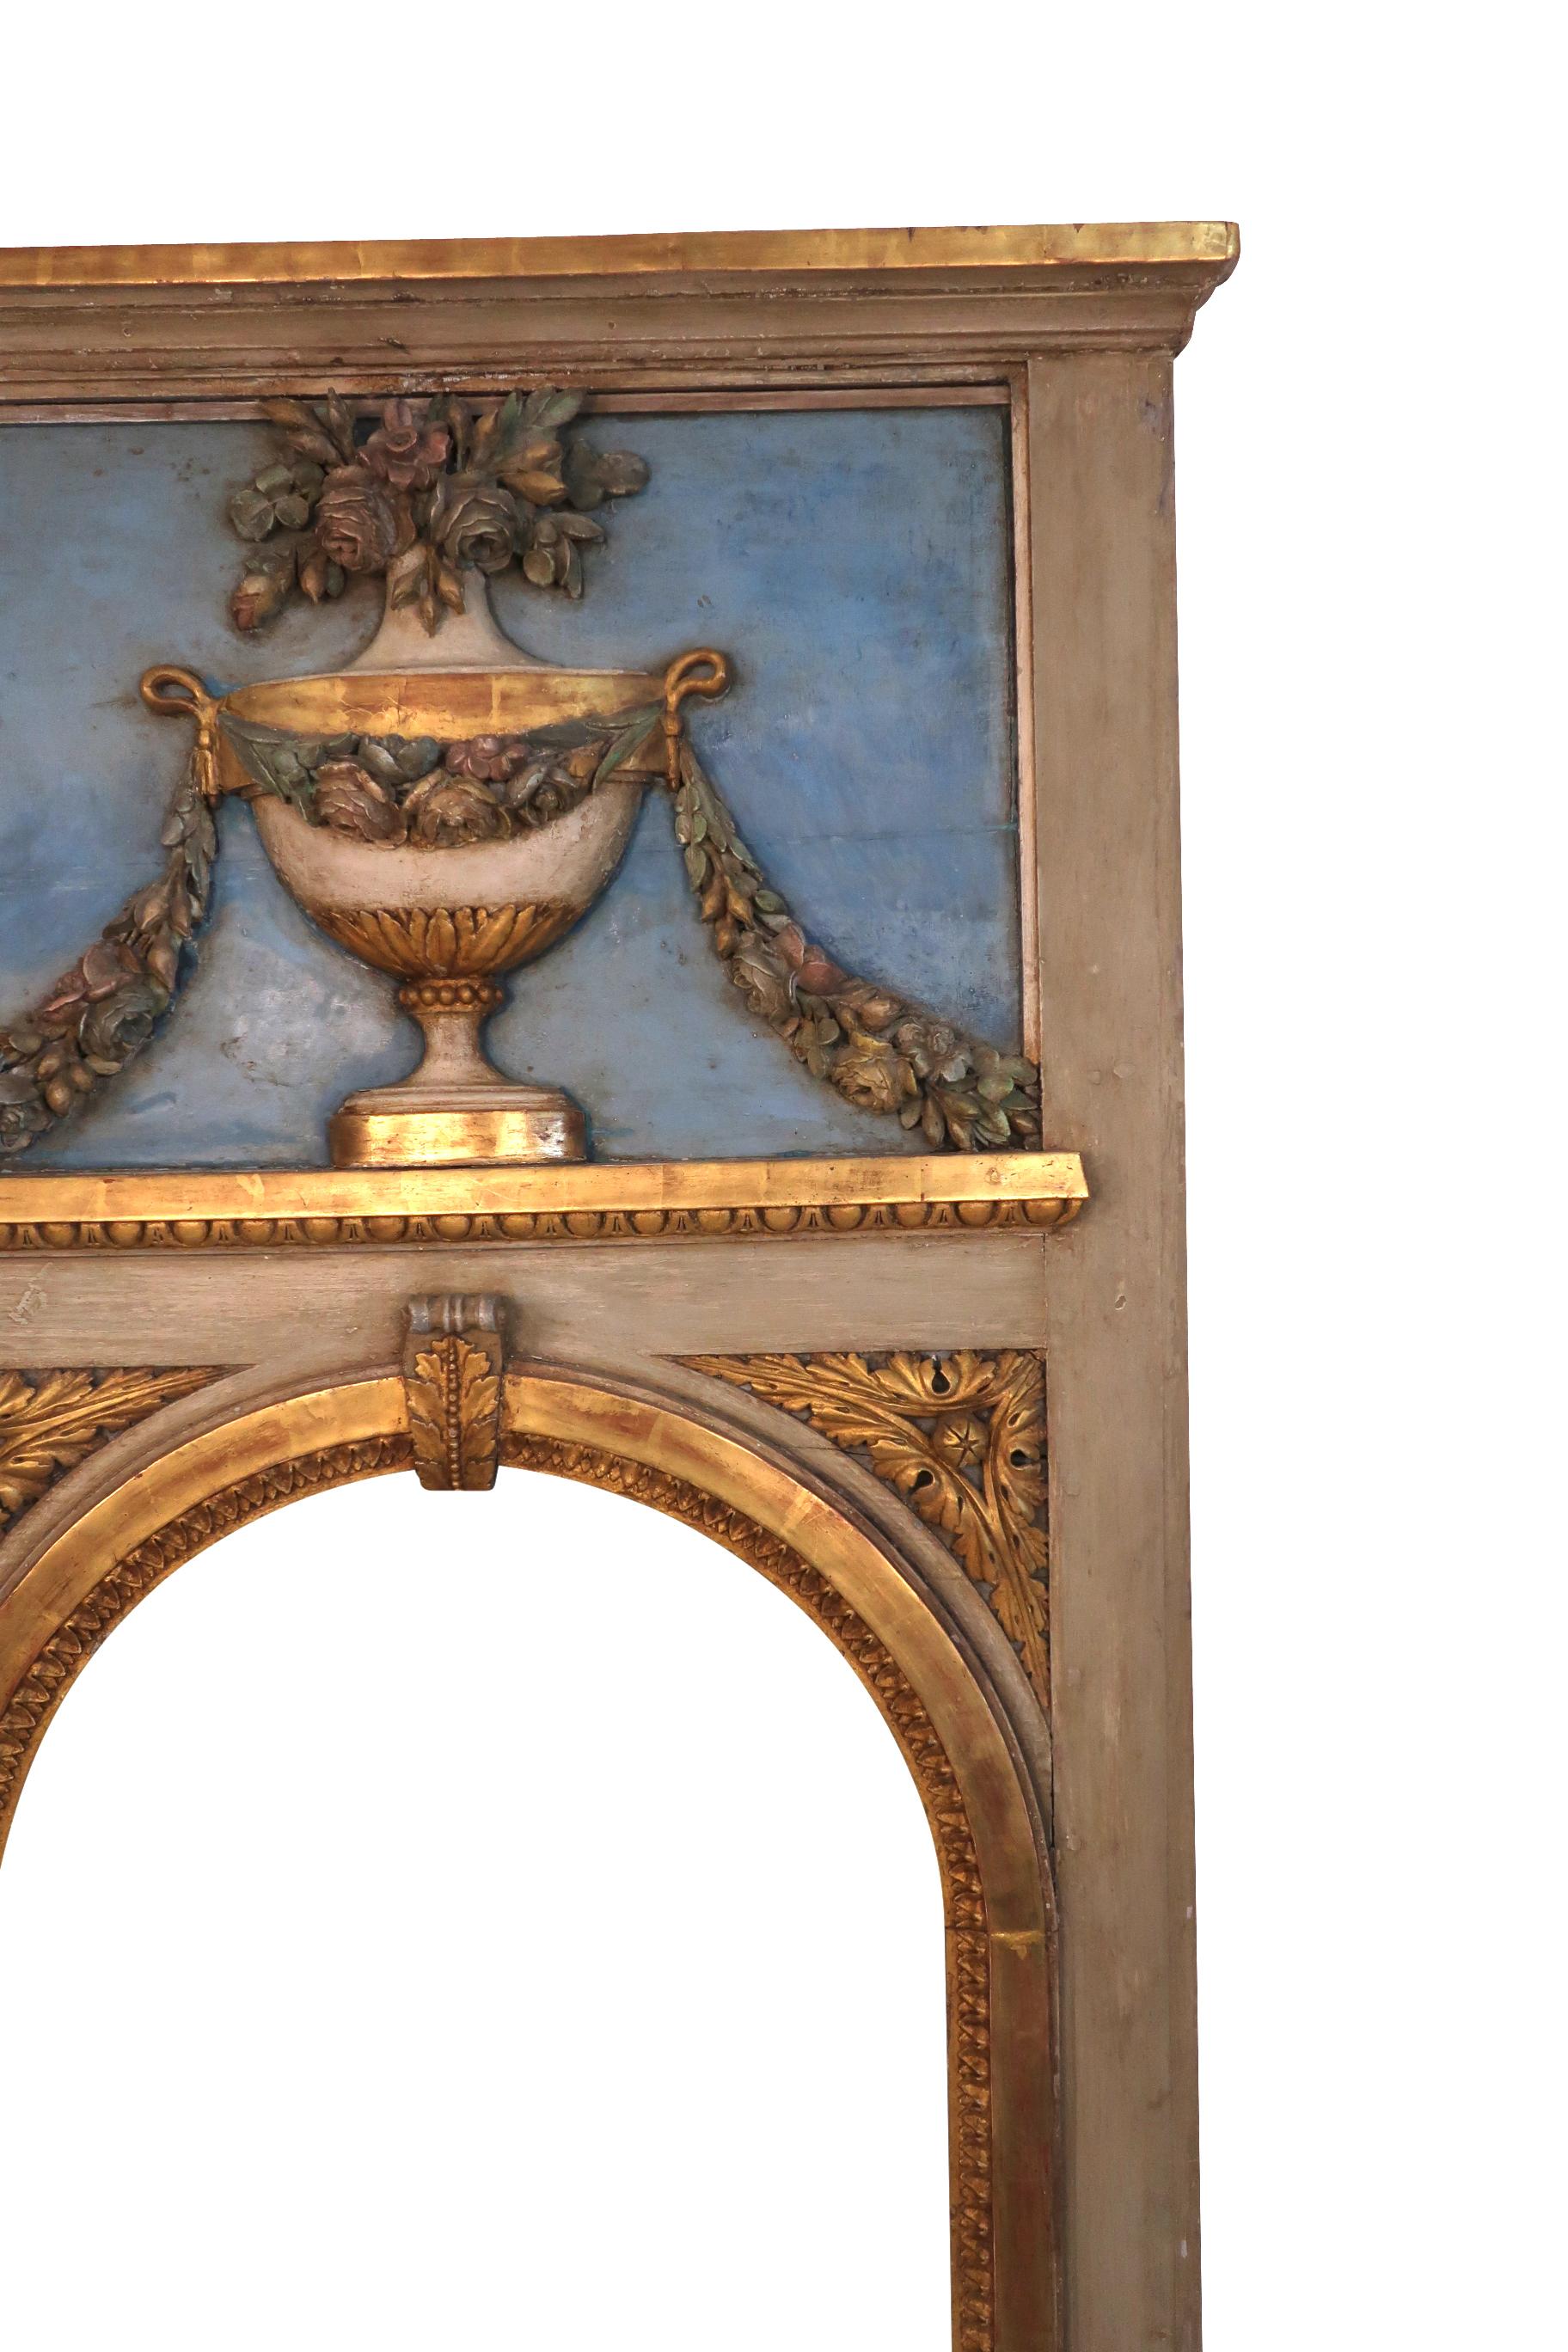 French 19th Century Blue Trumeau Mirror with Urn, Garland and Floral Decoration  For Sale